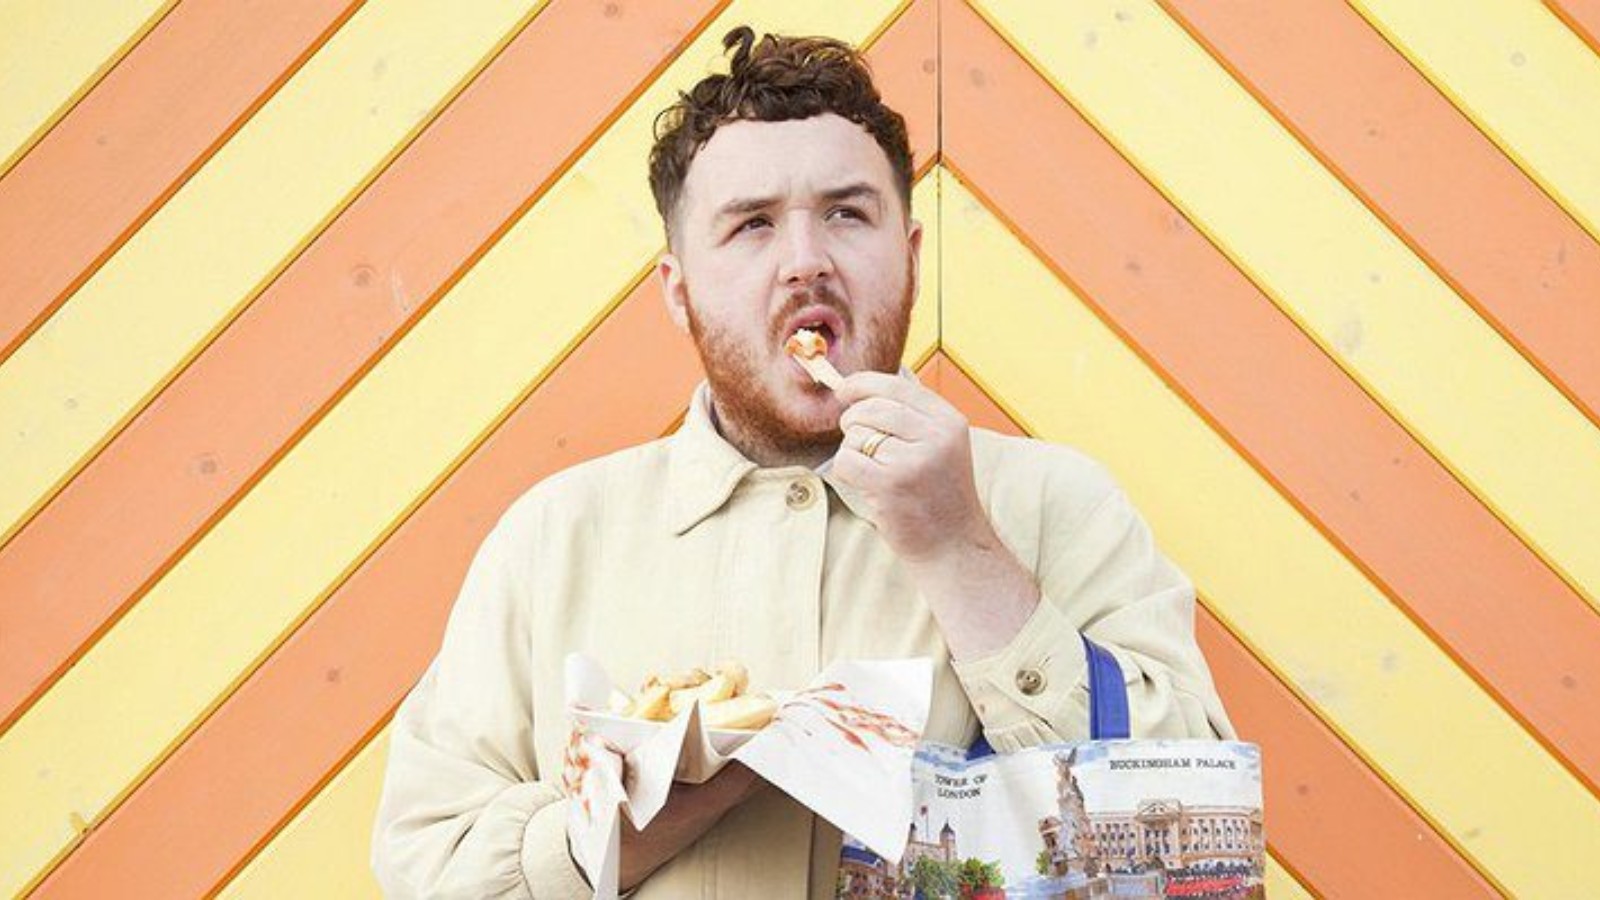 Scottee is photographed in front of a background that is yellow and orange planks of wood, eating chips looking upwards with a confused expression.